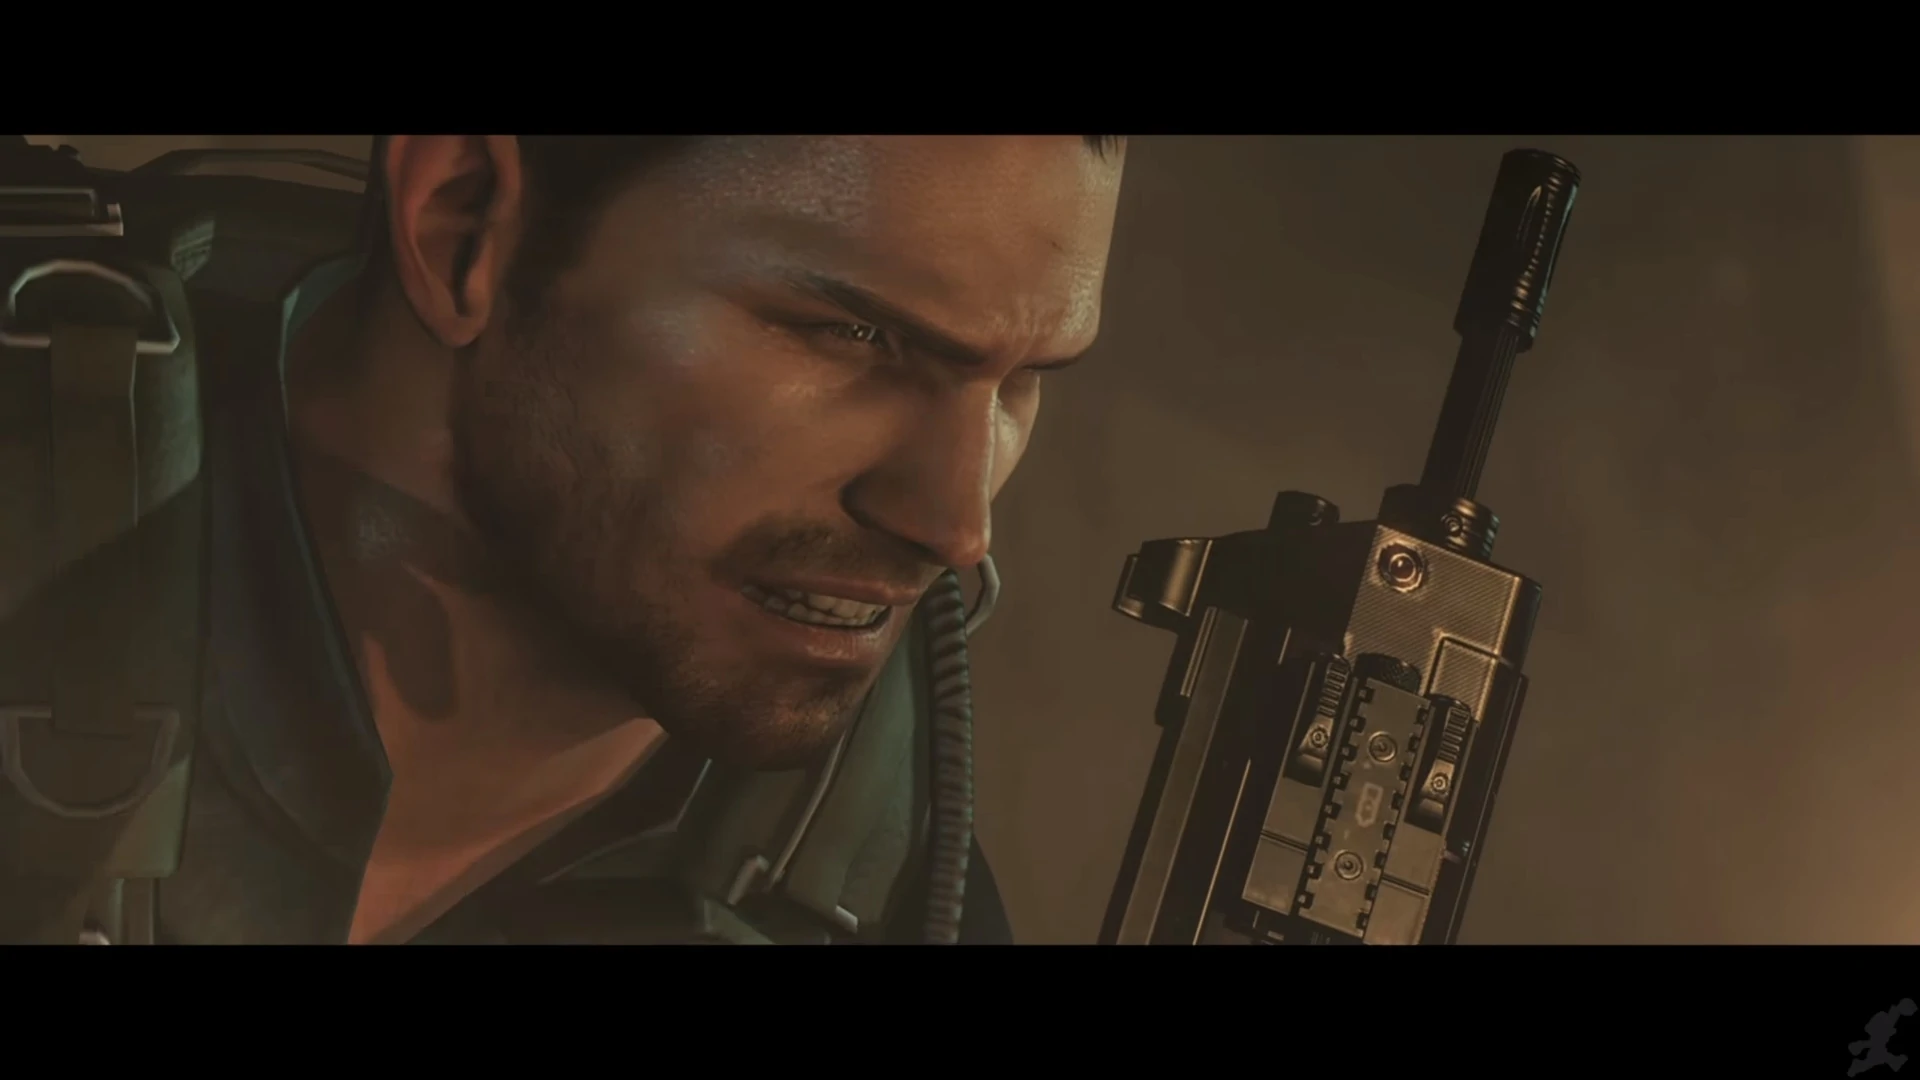 Chris Redfield arrives to rescue